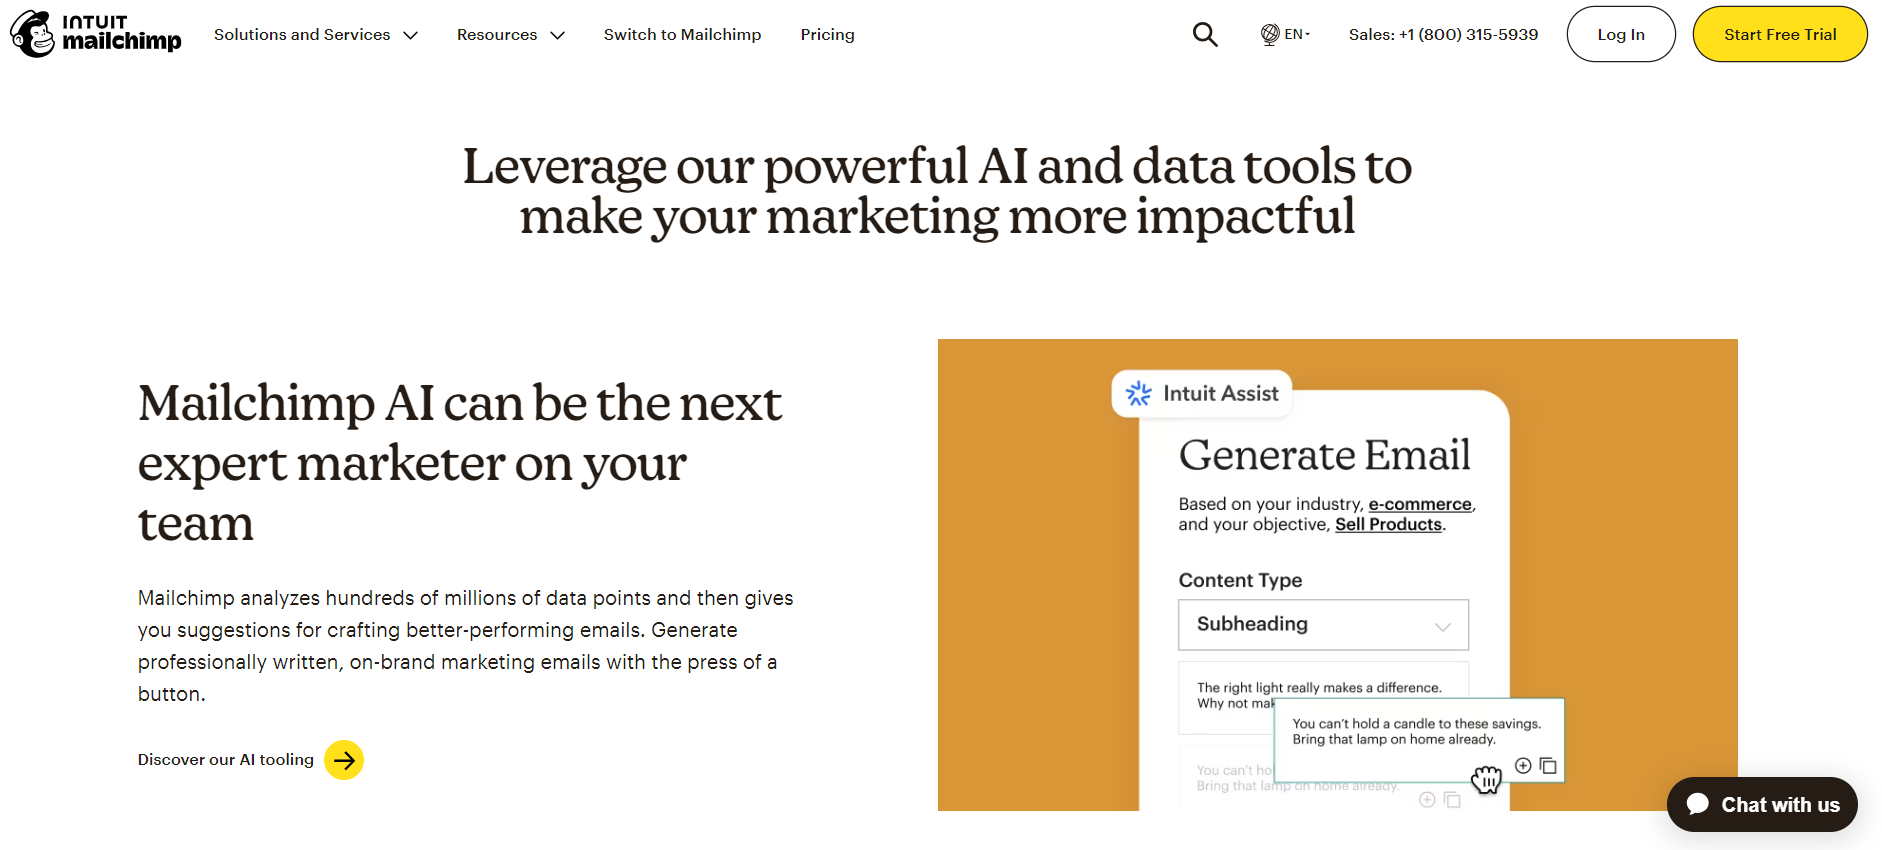 Mailchimp offers an AI tool to enhance email campaigns, helping marketers target the right audience with the right content